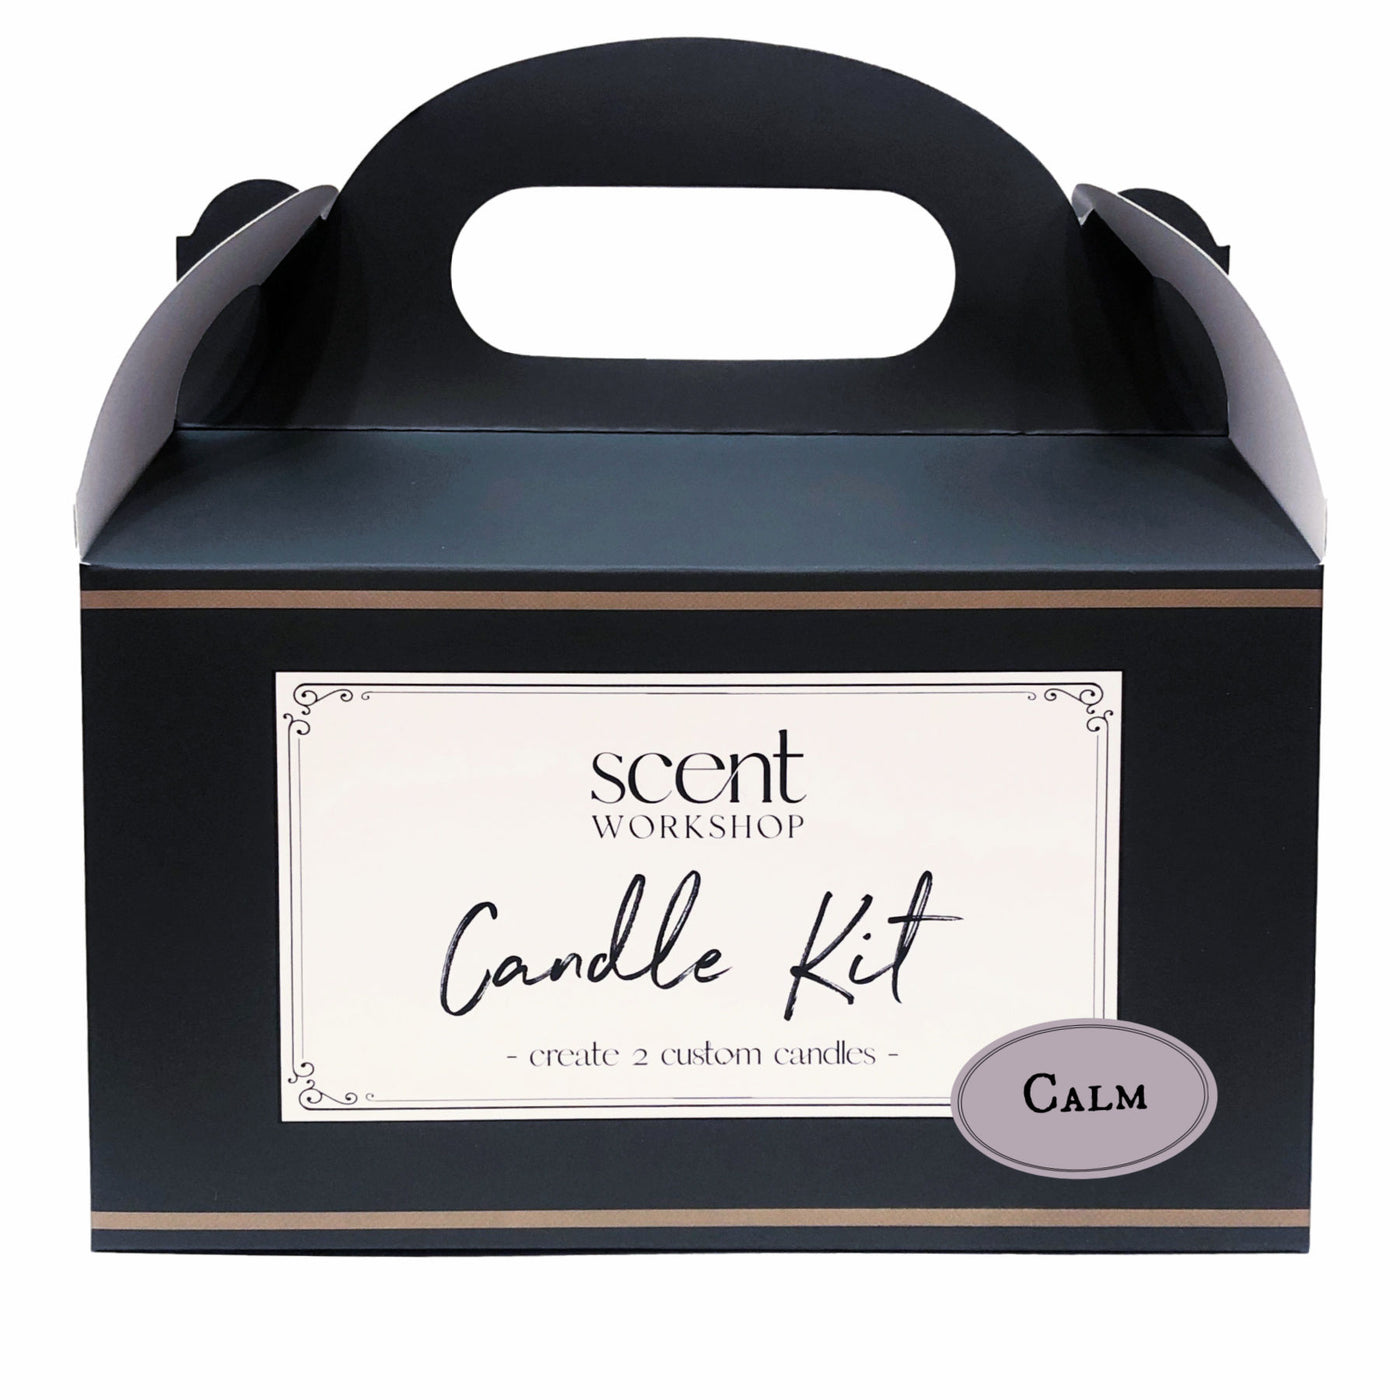 Shop LC Home Decor DIY Calm Scented Candles Making Kit 2 lb Wax